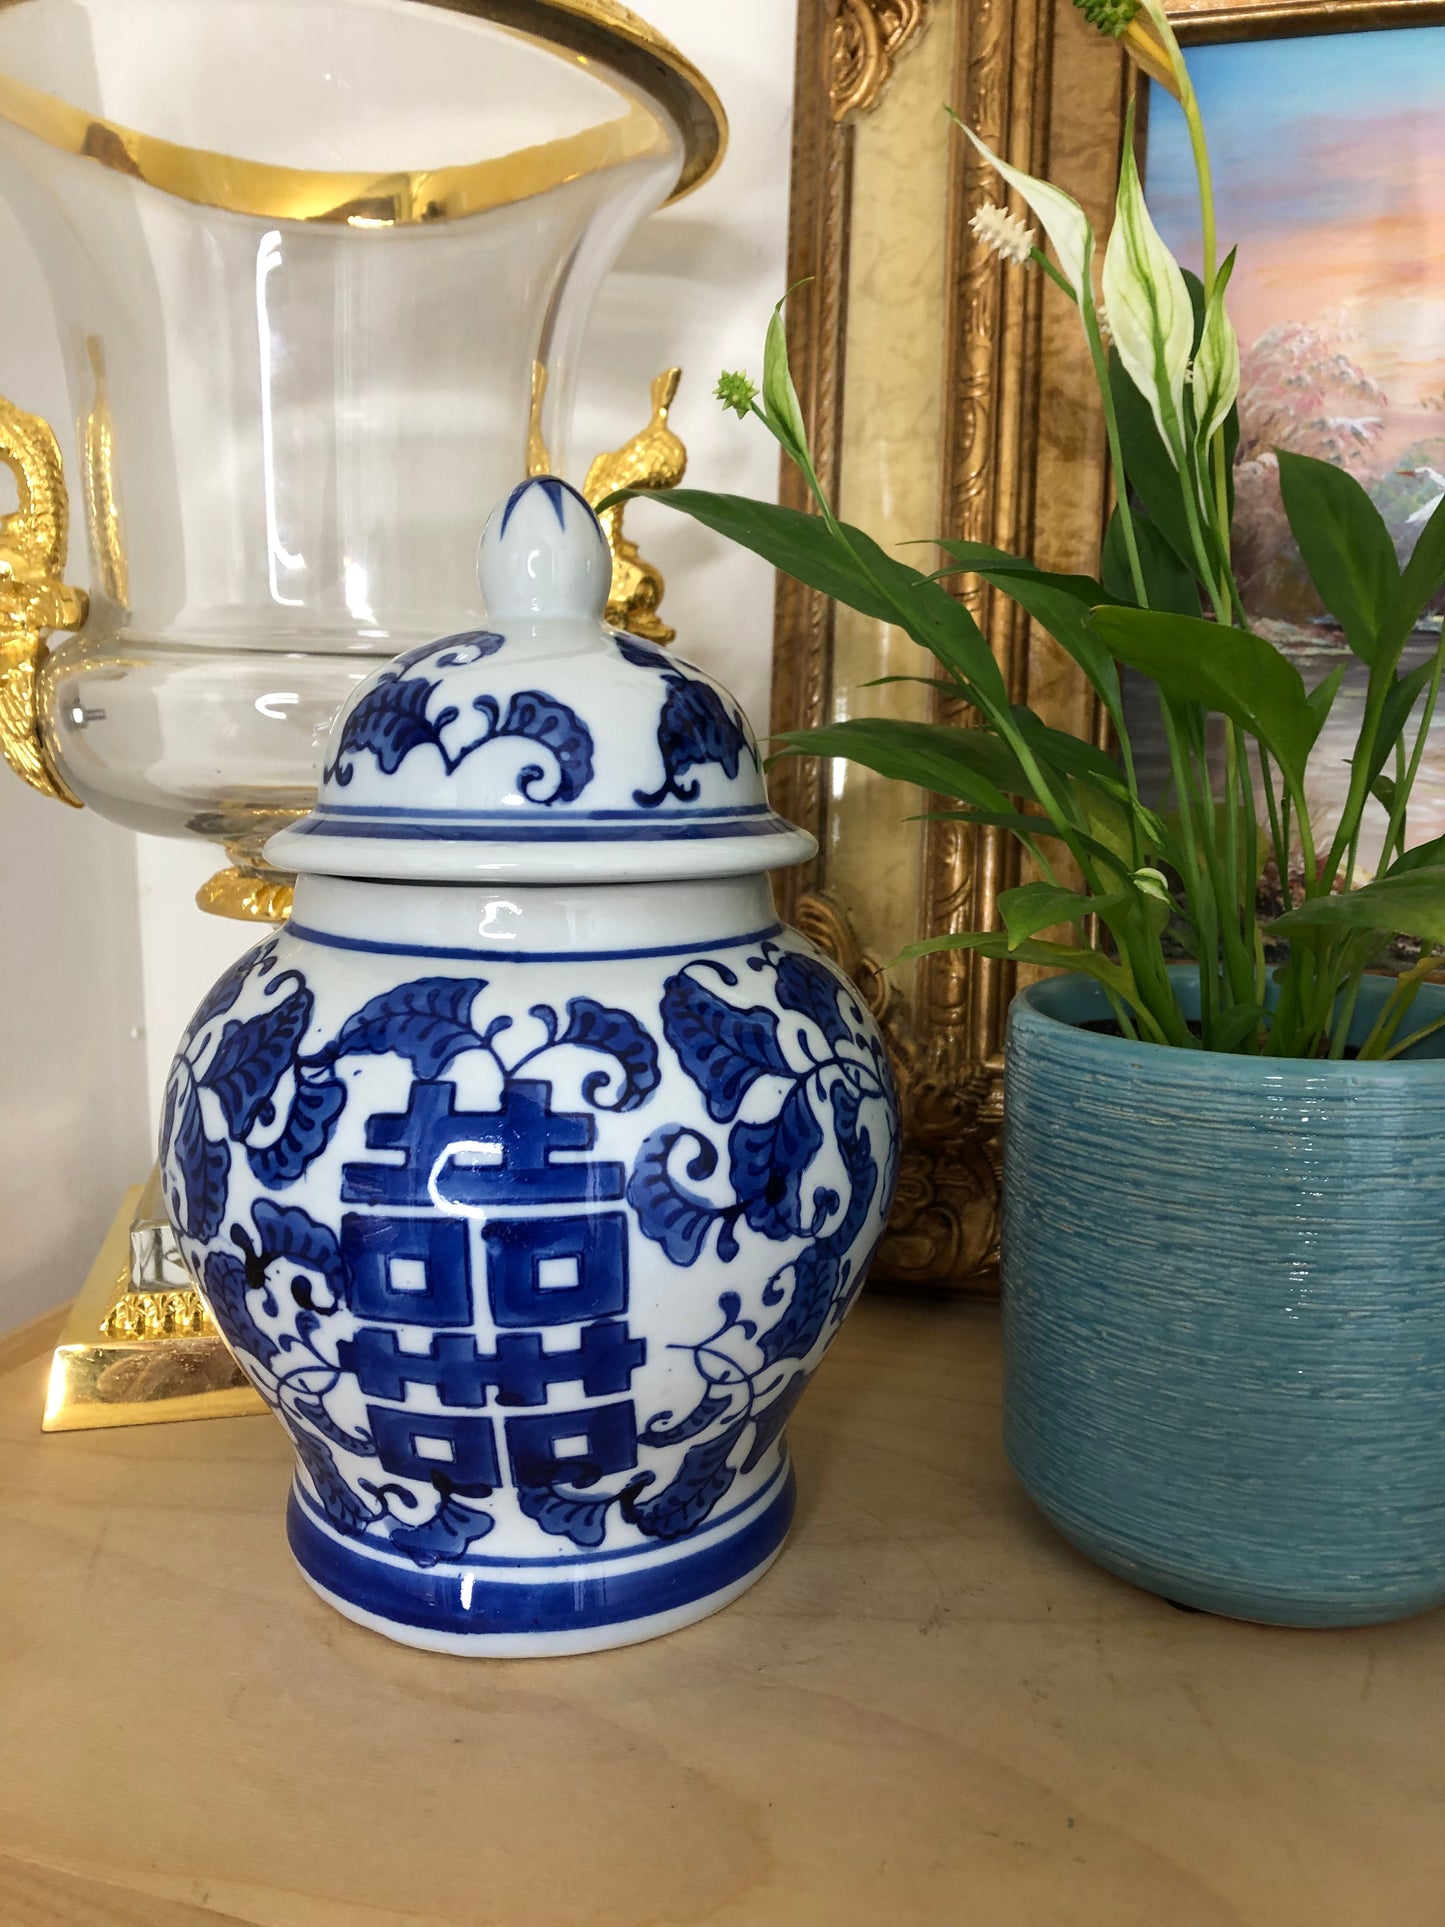 Gorgeous Double Happiness Blue and White Ginger Jar - Excellent Condition!